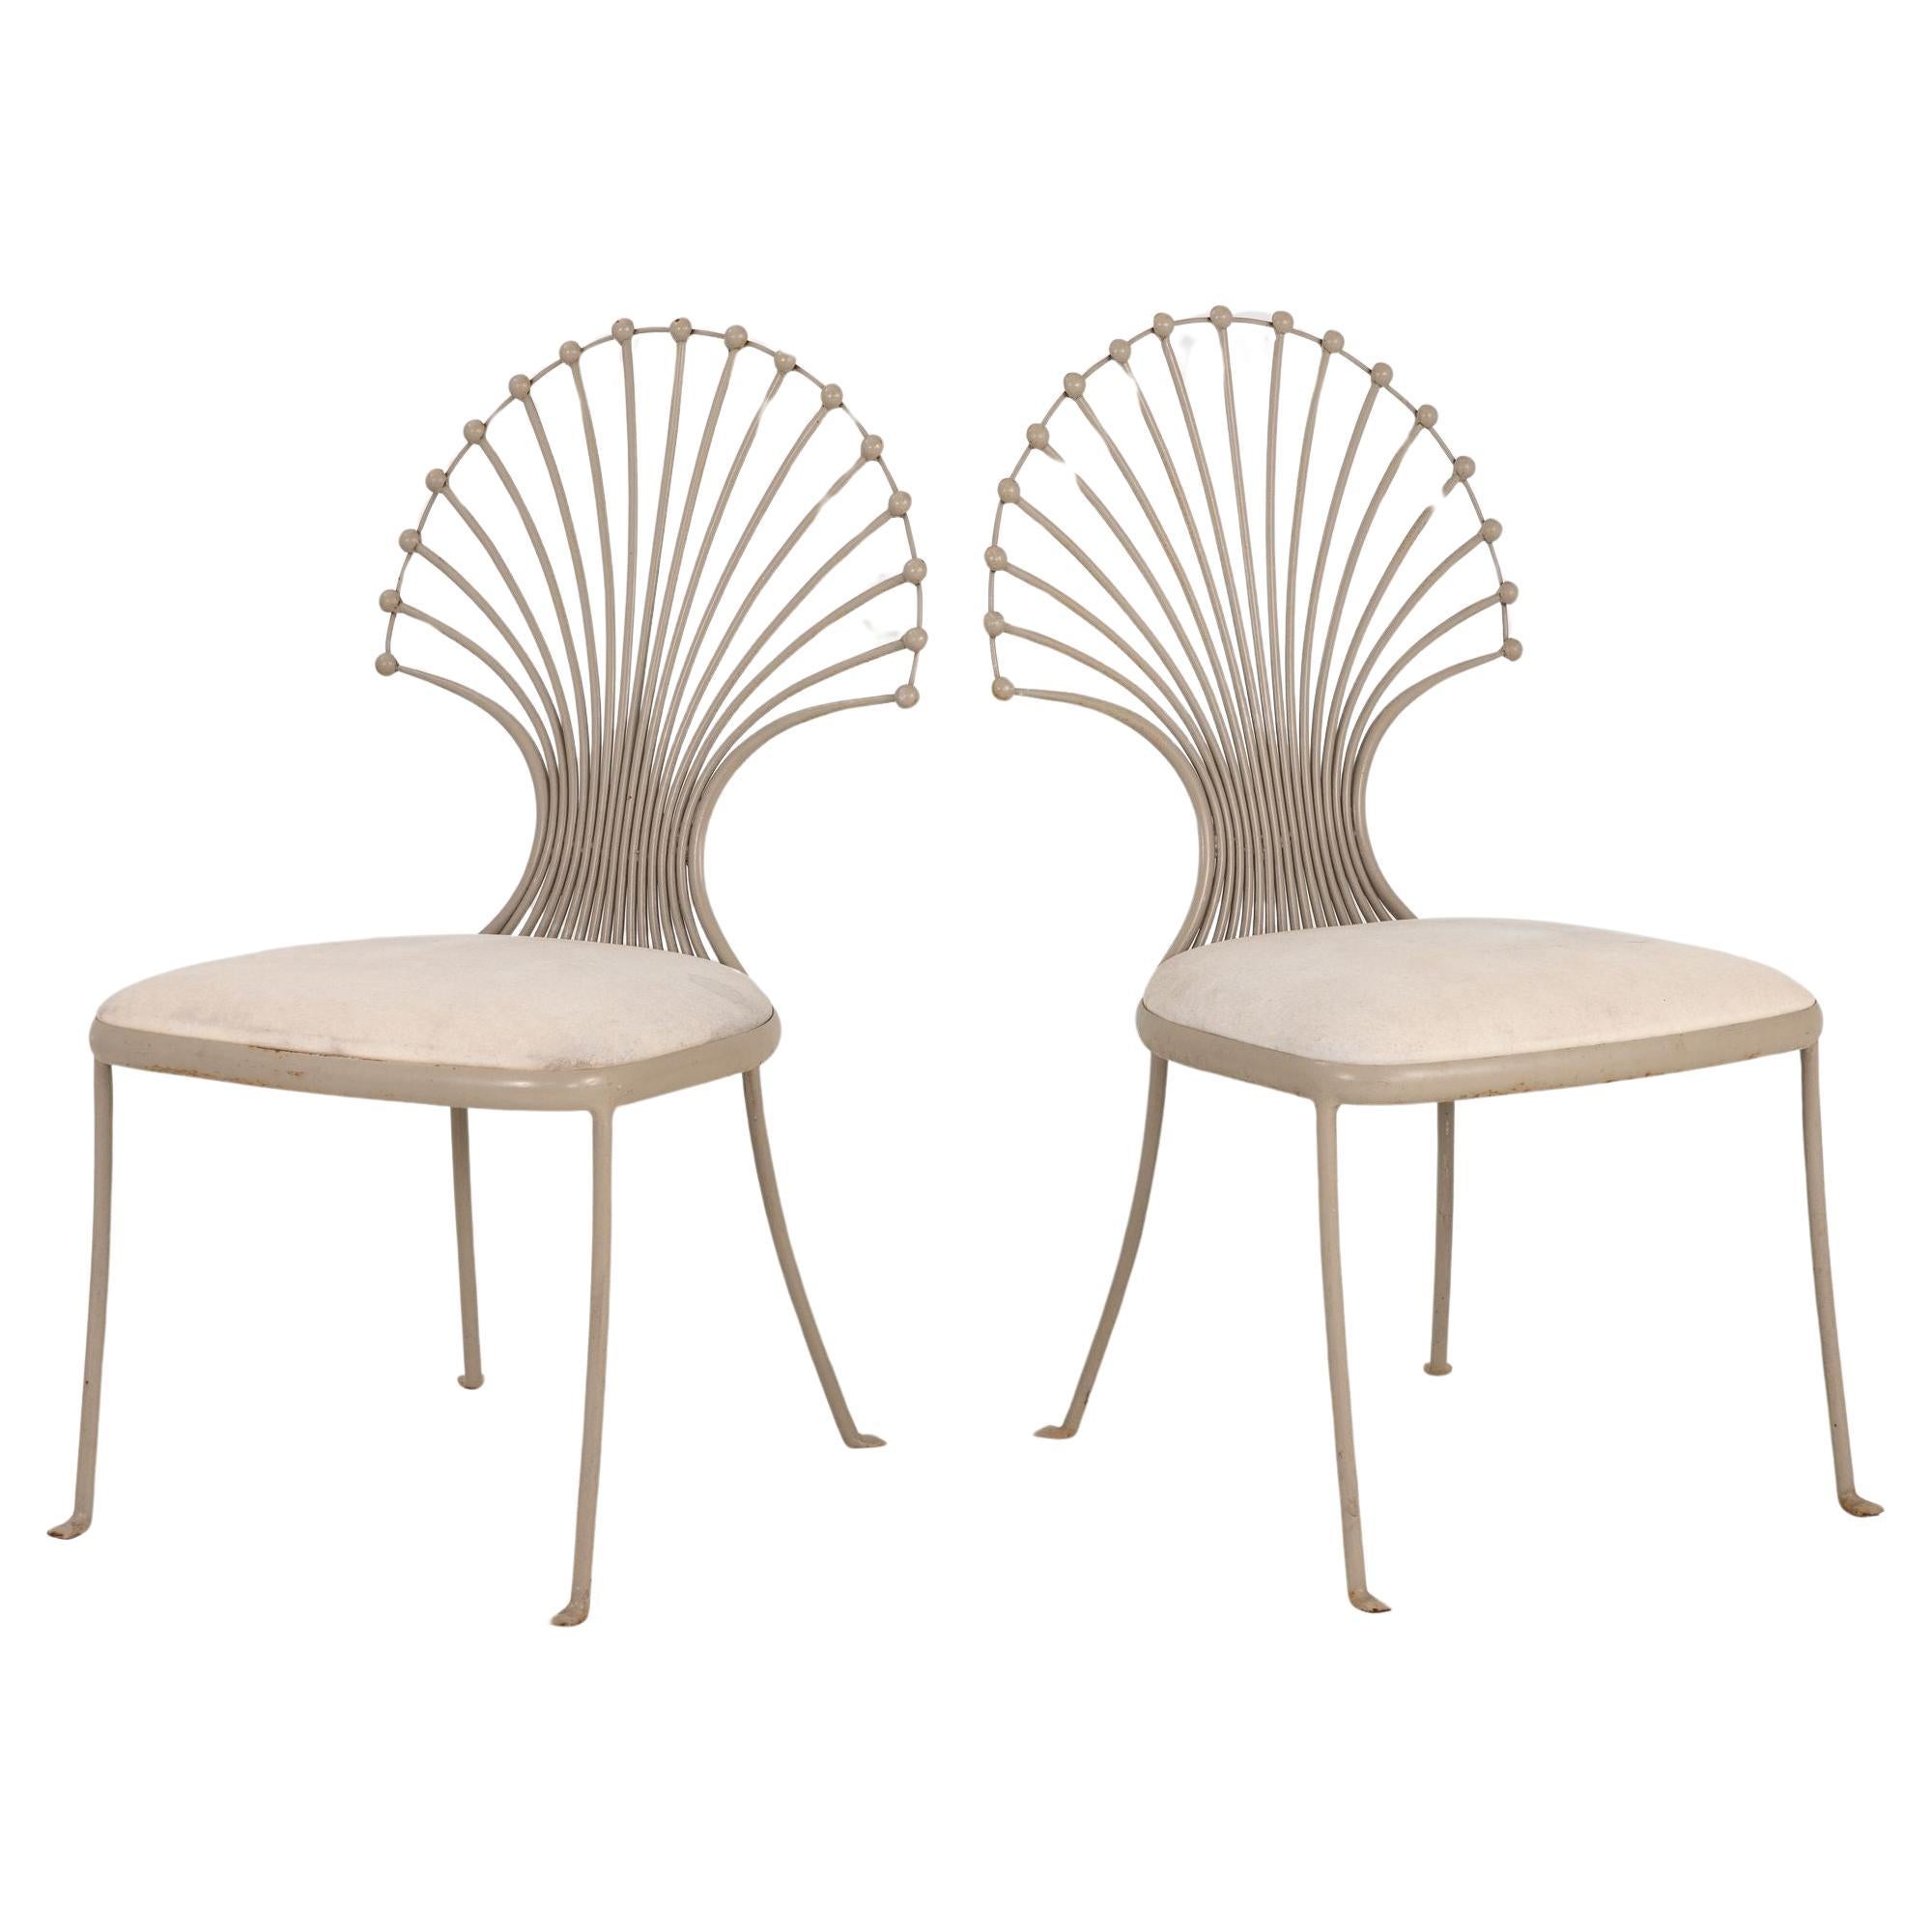 Pair Side Chairs with Peacock or Wheat Sheaf Motif, Gray Painted Aluminum